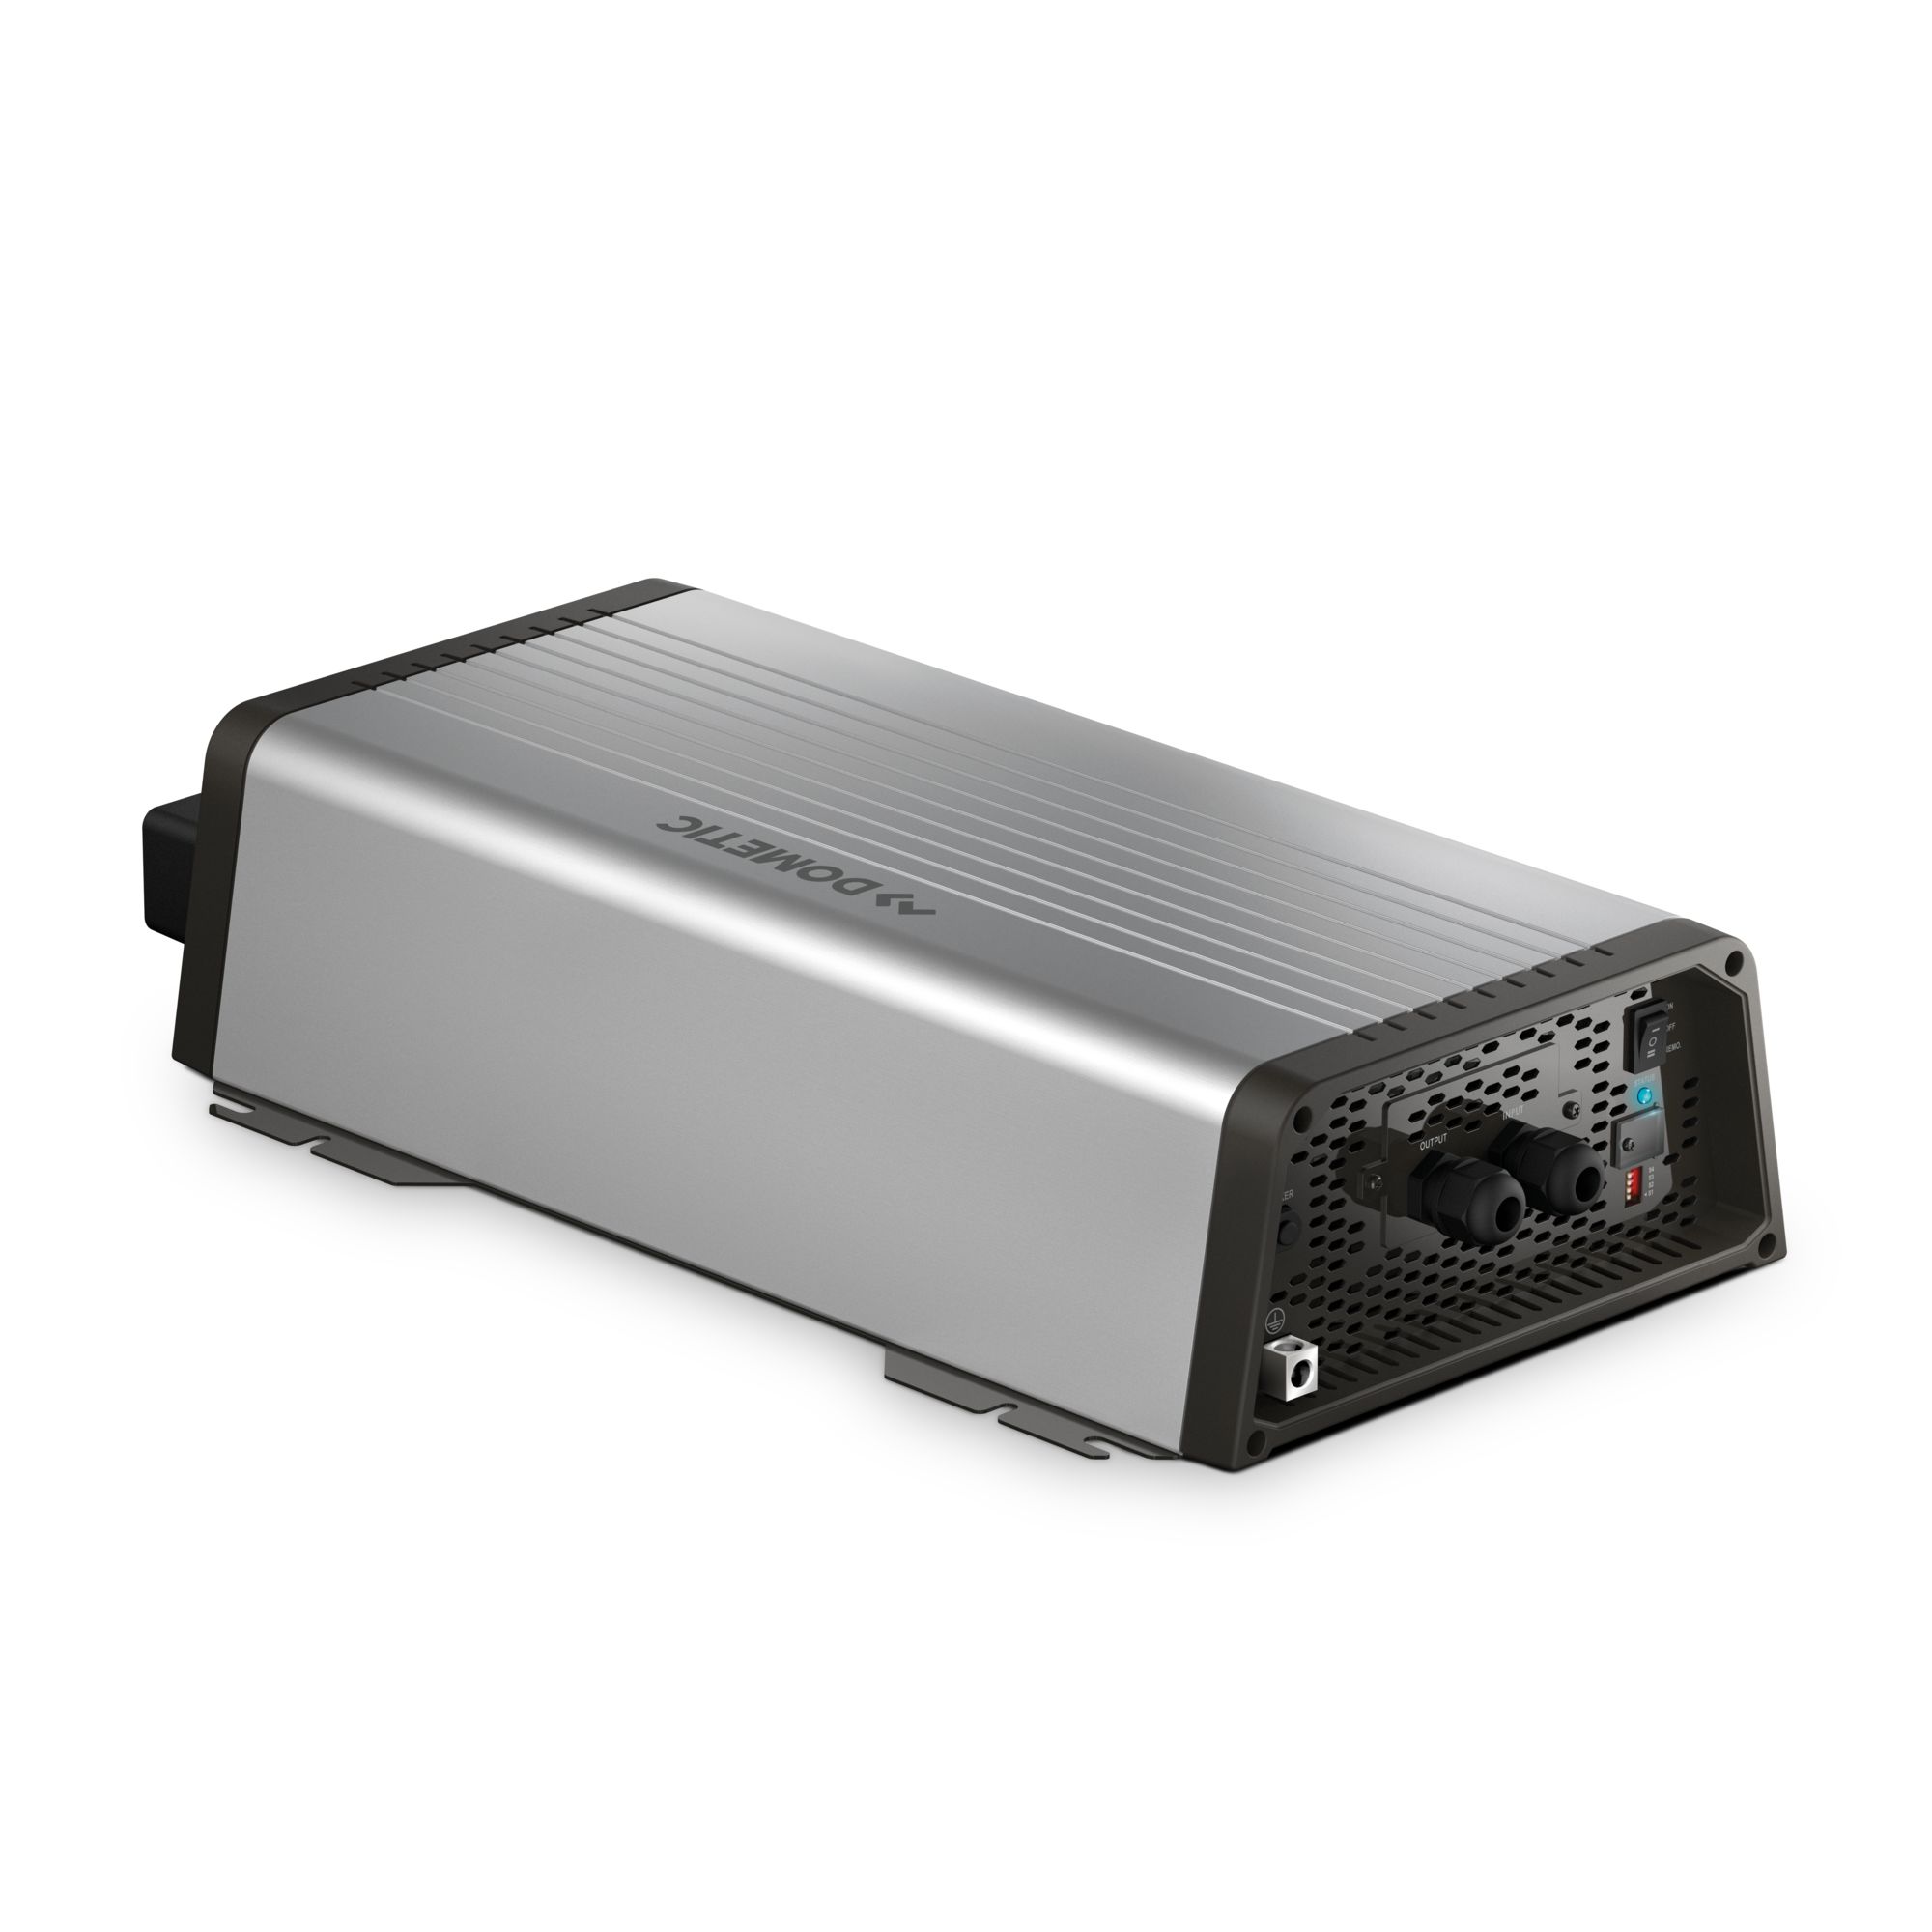 Dometic SINEPOWER DSP 1812T, 1,800W, 12V, Comfort Sine Wave Inverter with integrated mains priority circuit